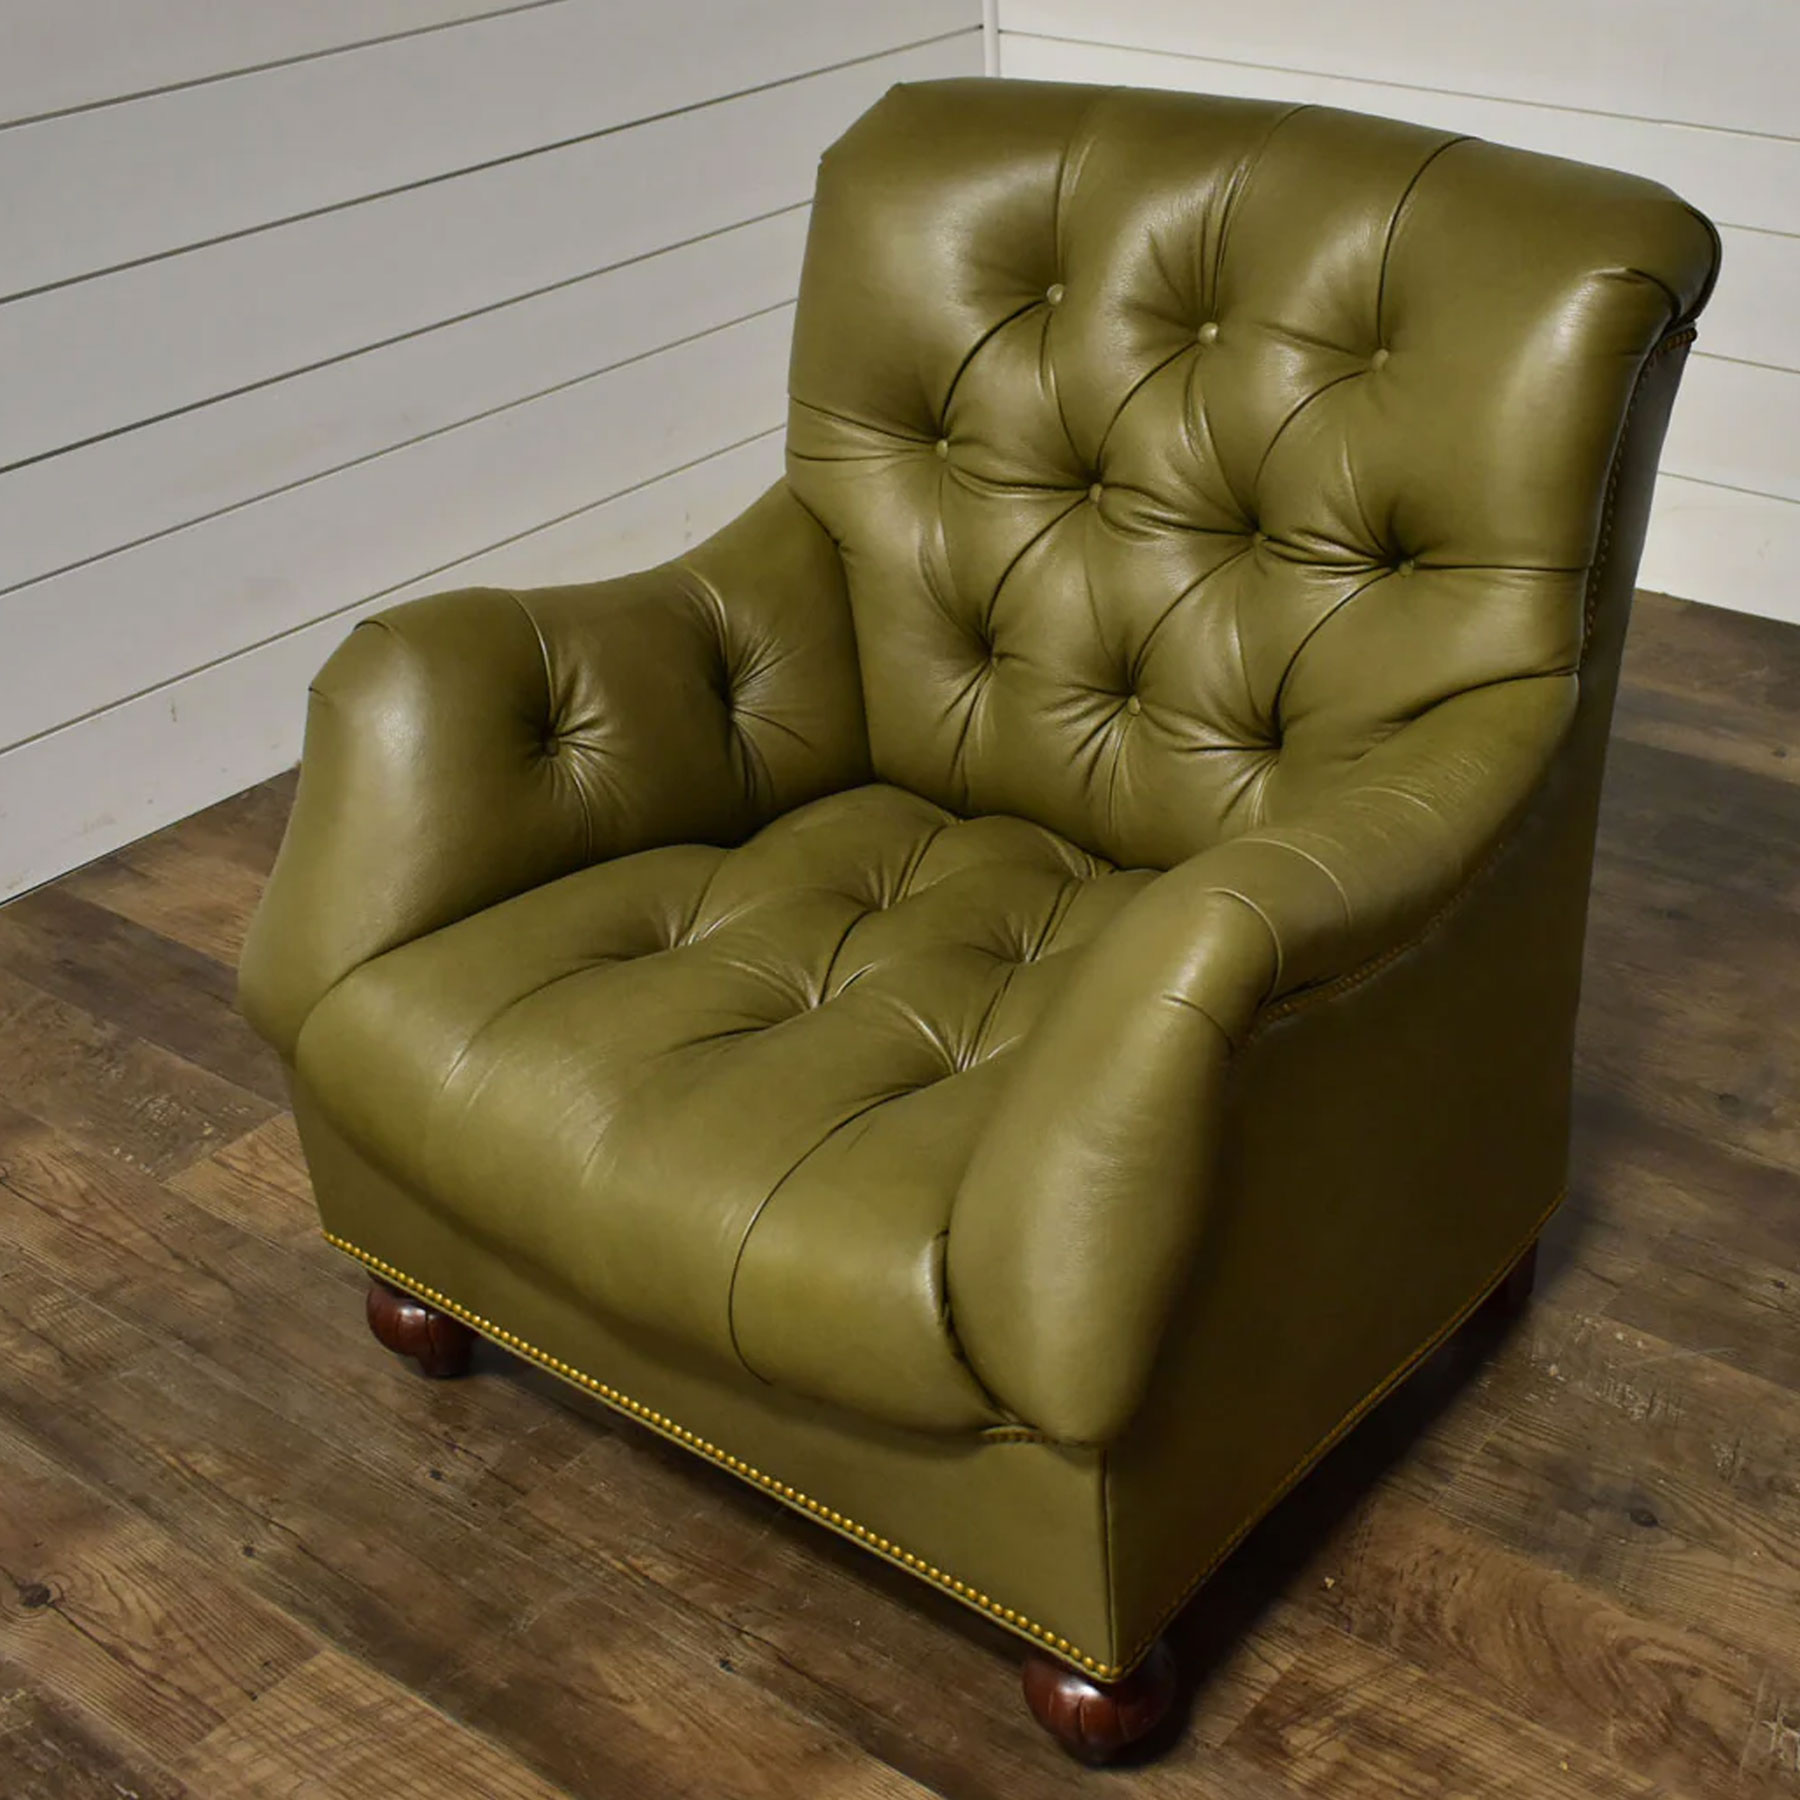 McKinley Leather 801 Henry Chair in Medici Meadow Leather